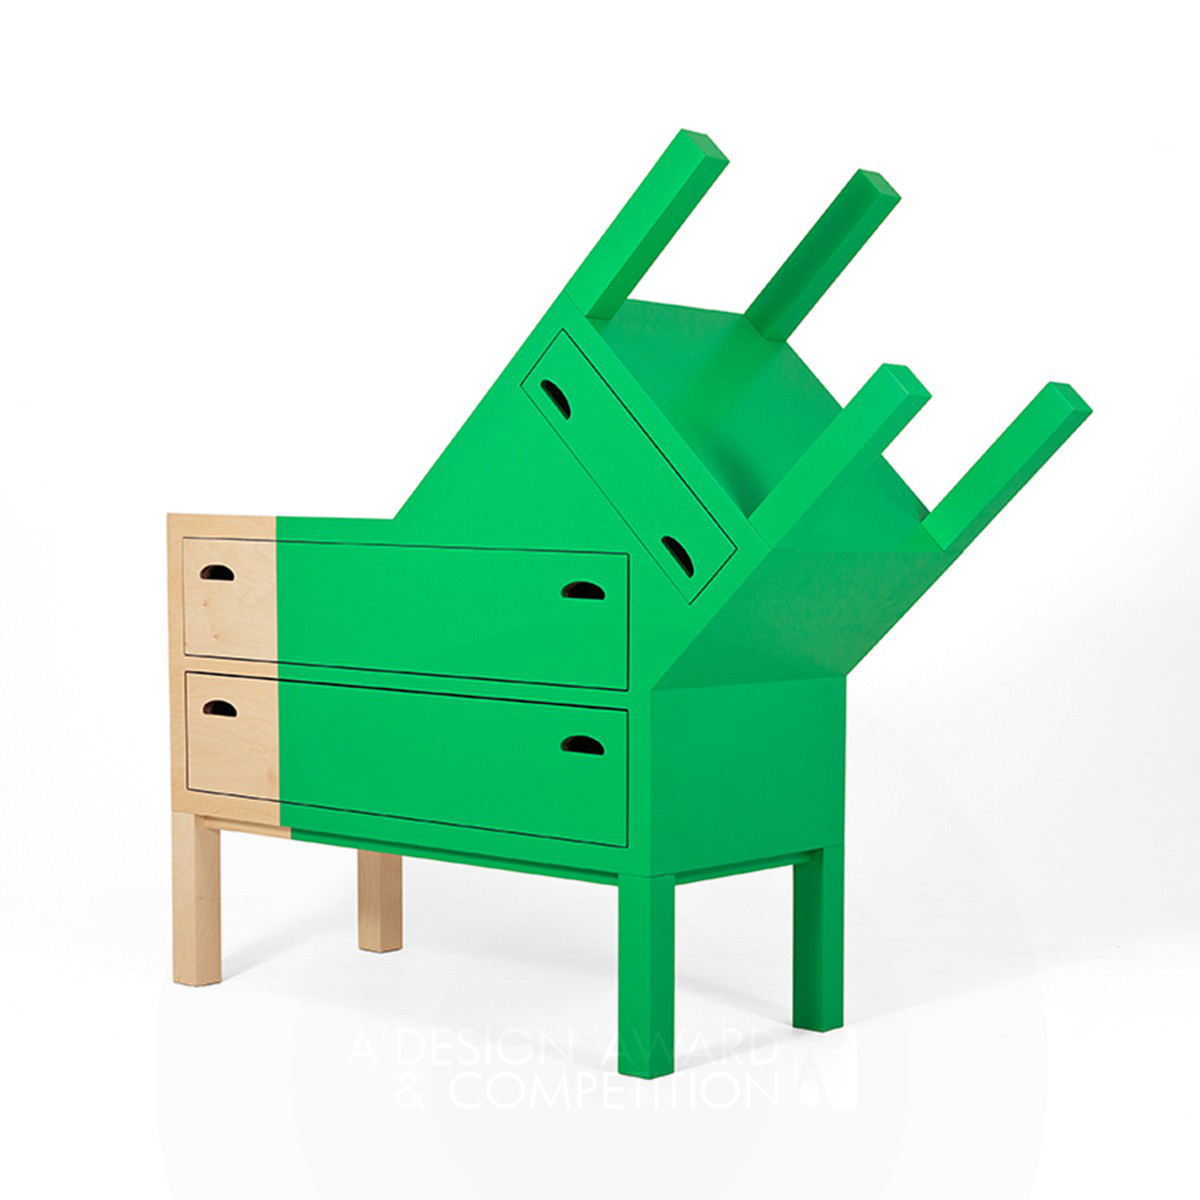 The Doubleface <b>Chest of drawers